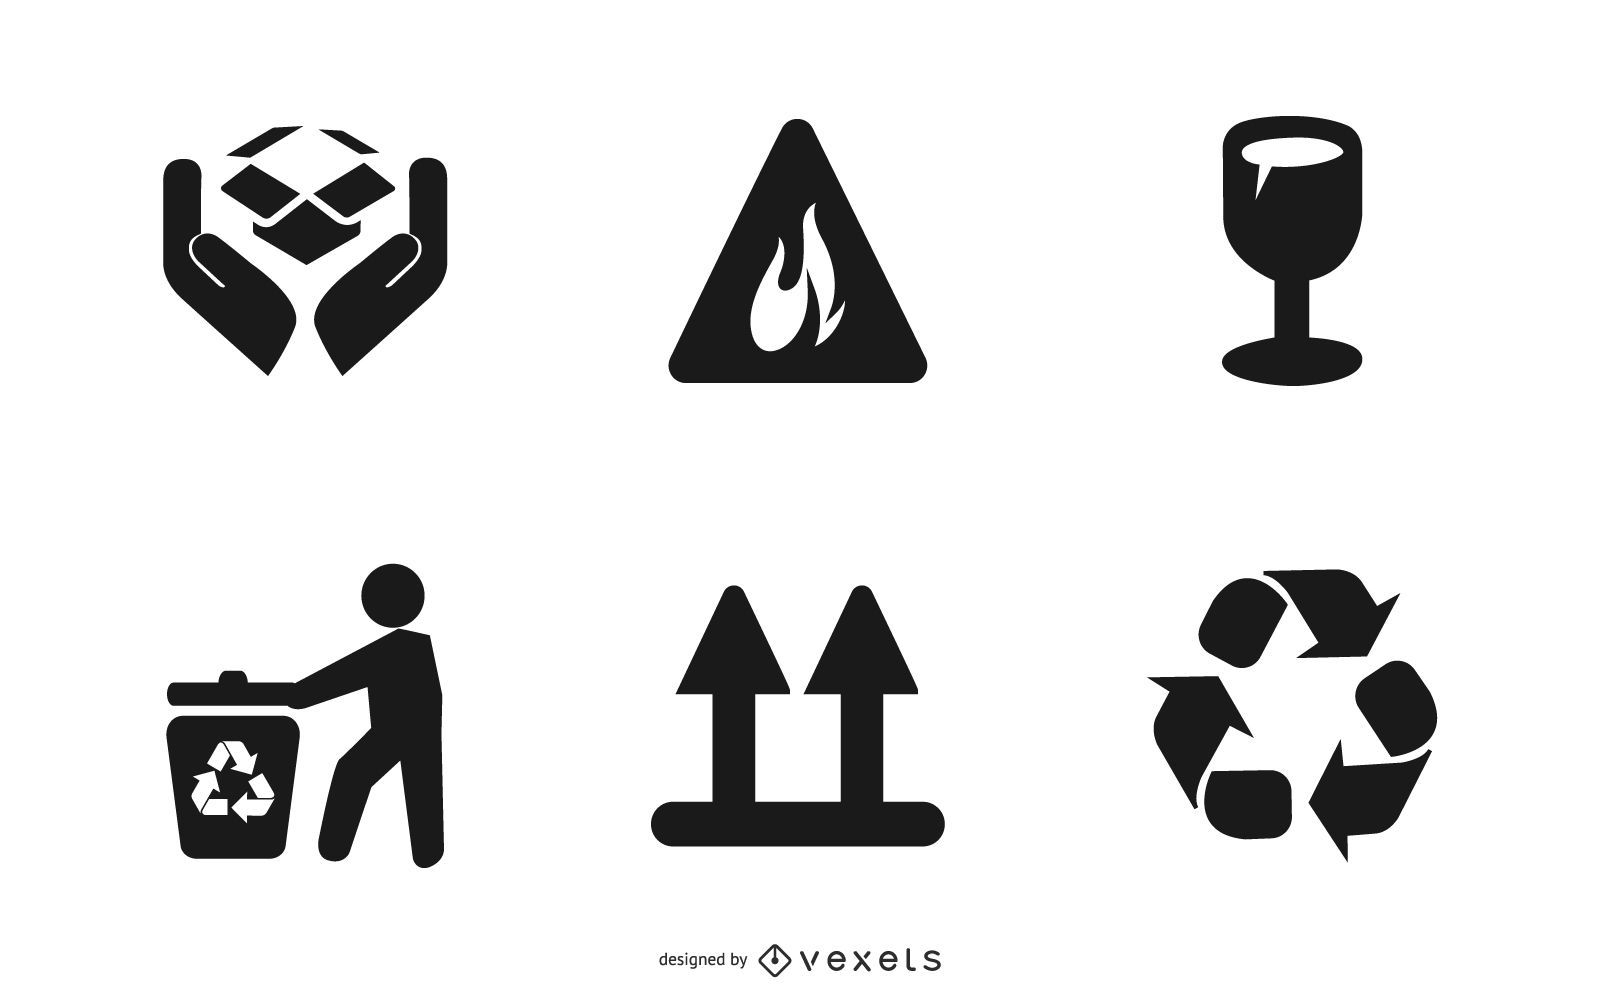 Common Signs and Symbols Set